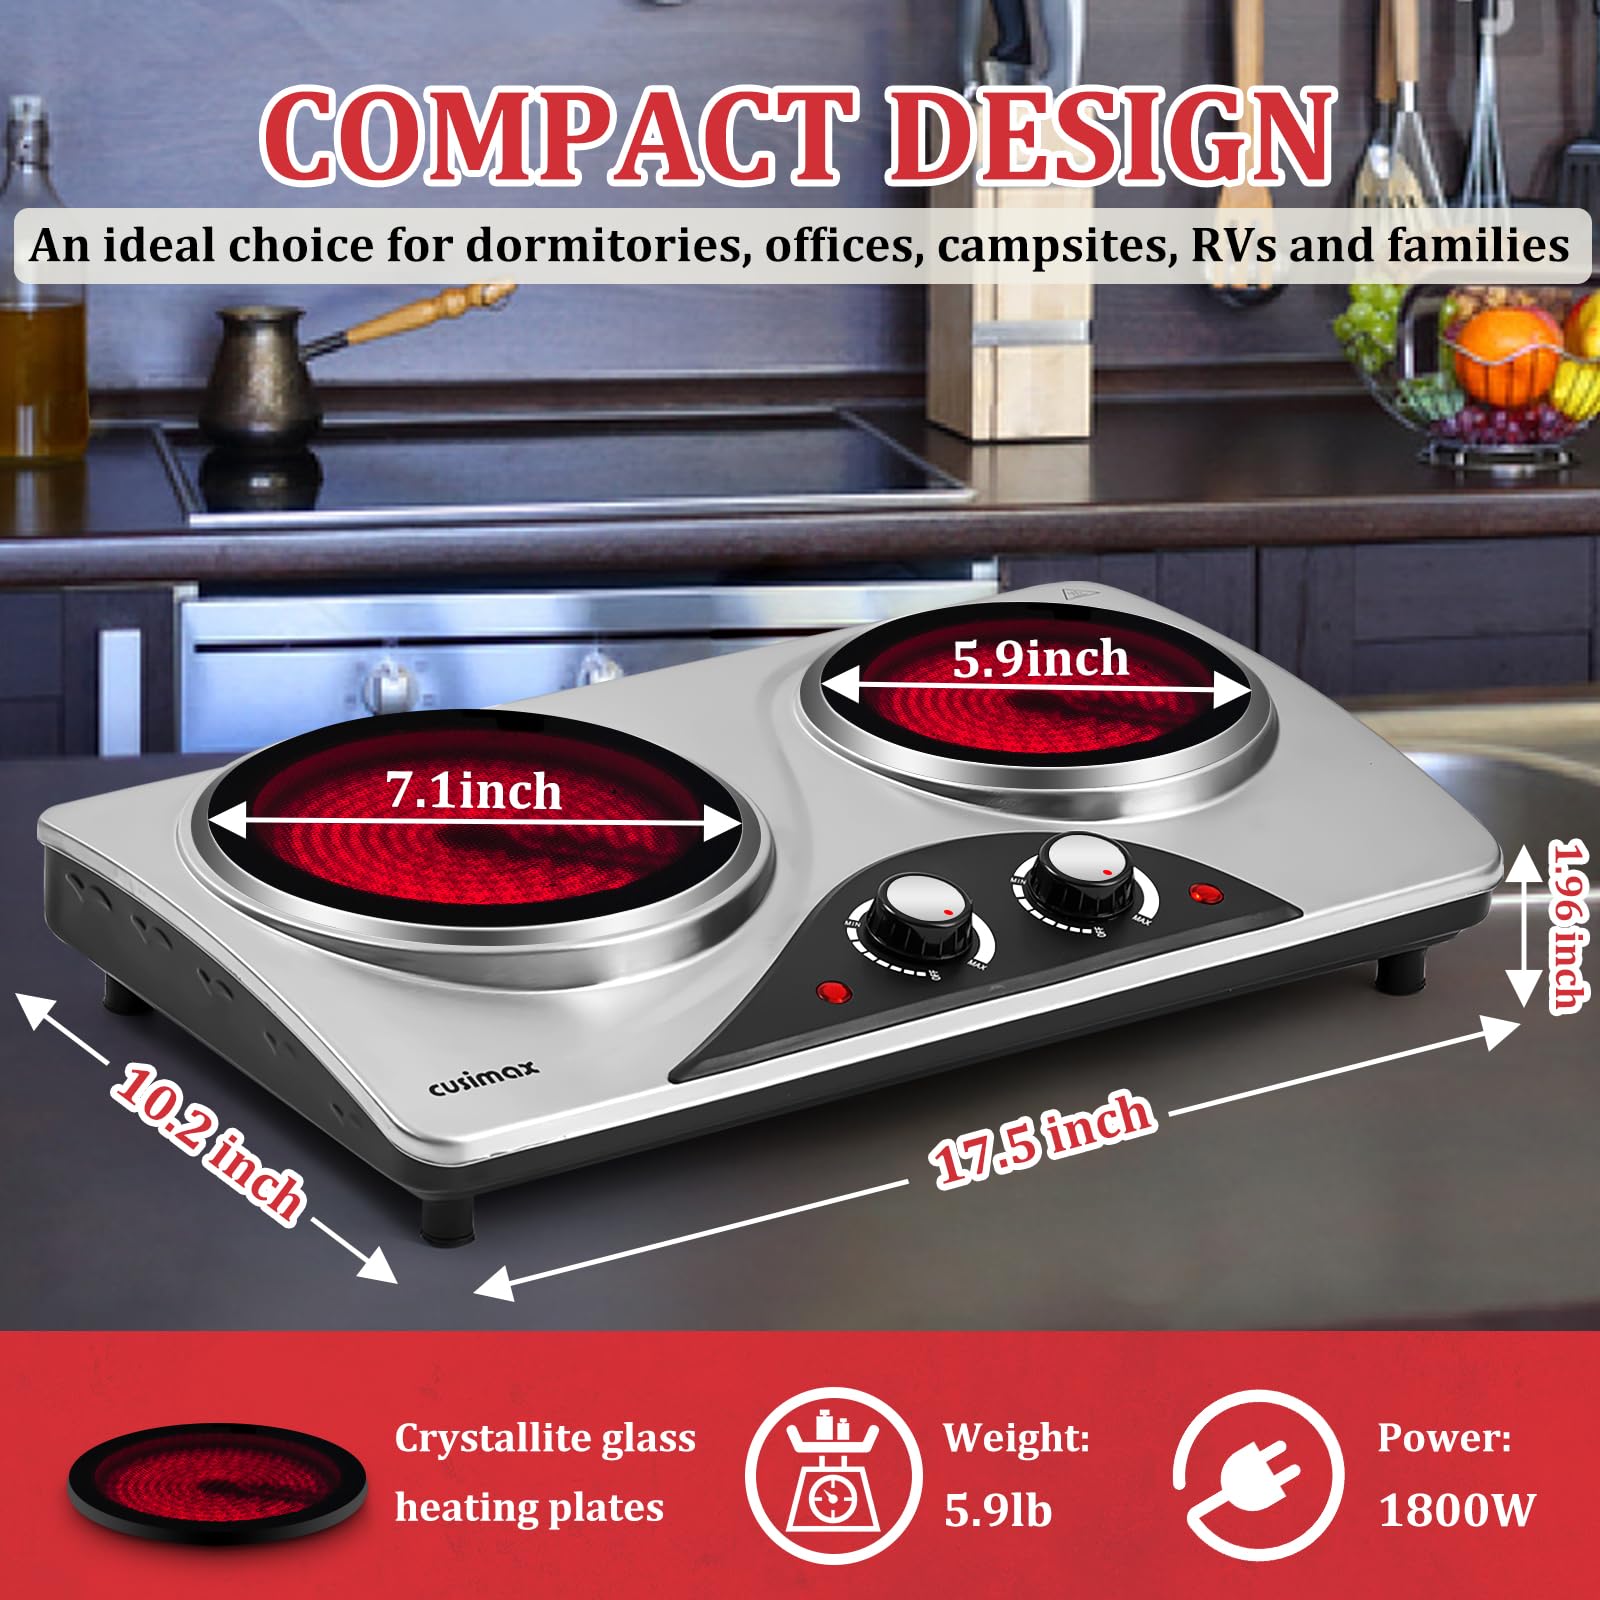 Electric Hot Plate for Cooking, Infrared Double Burner,1800W Portable  Electric Stove,Heat-up In Snds,Countertop Cooktop for Dorm Office Home  Camp, Compatible with All Cookware